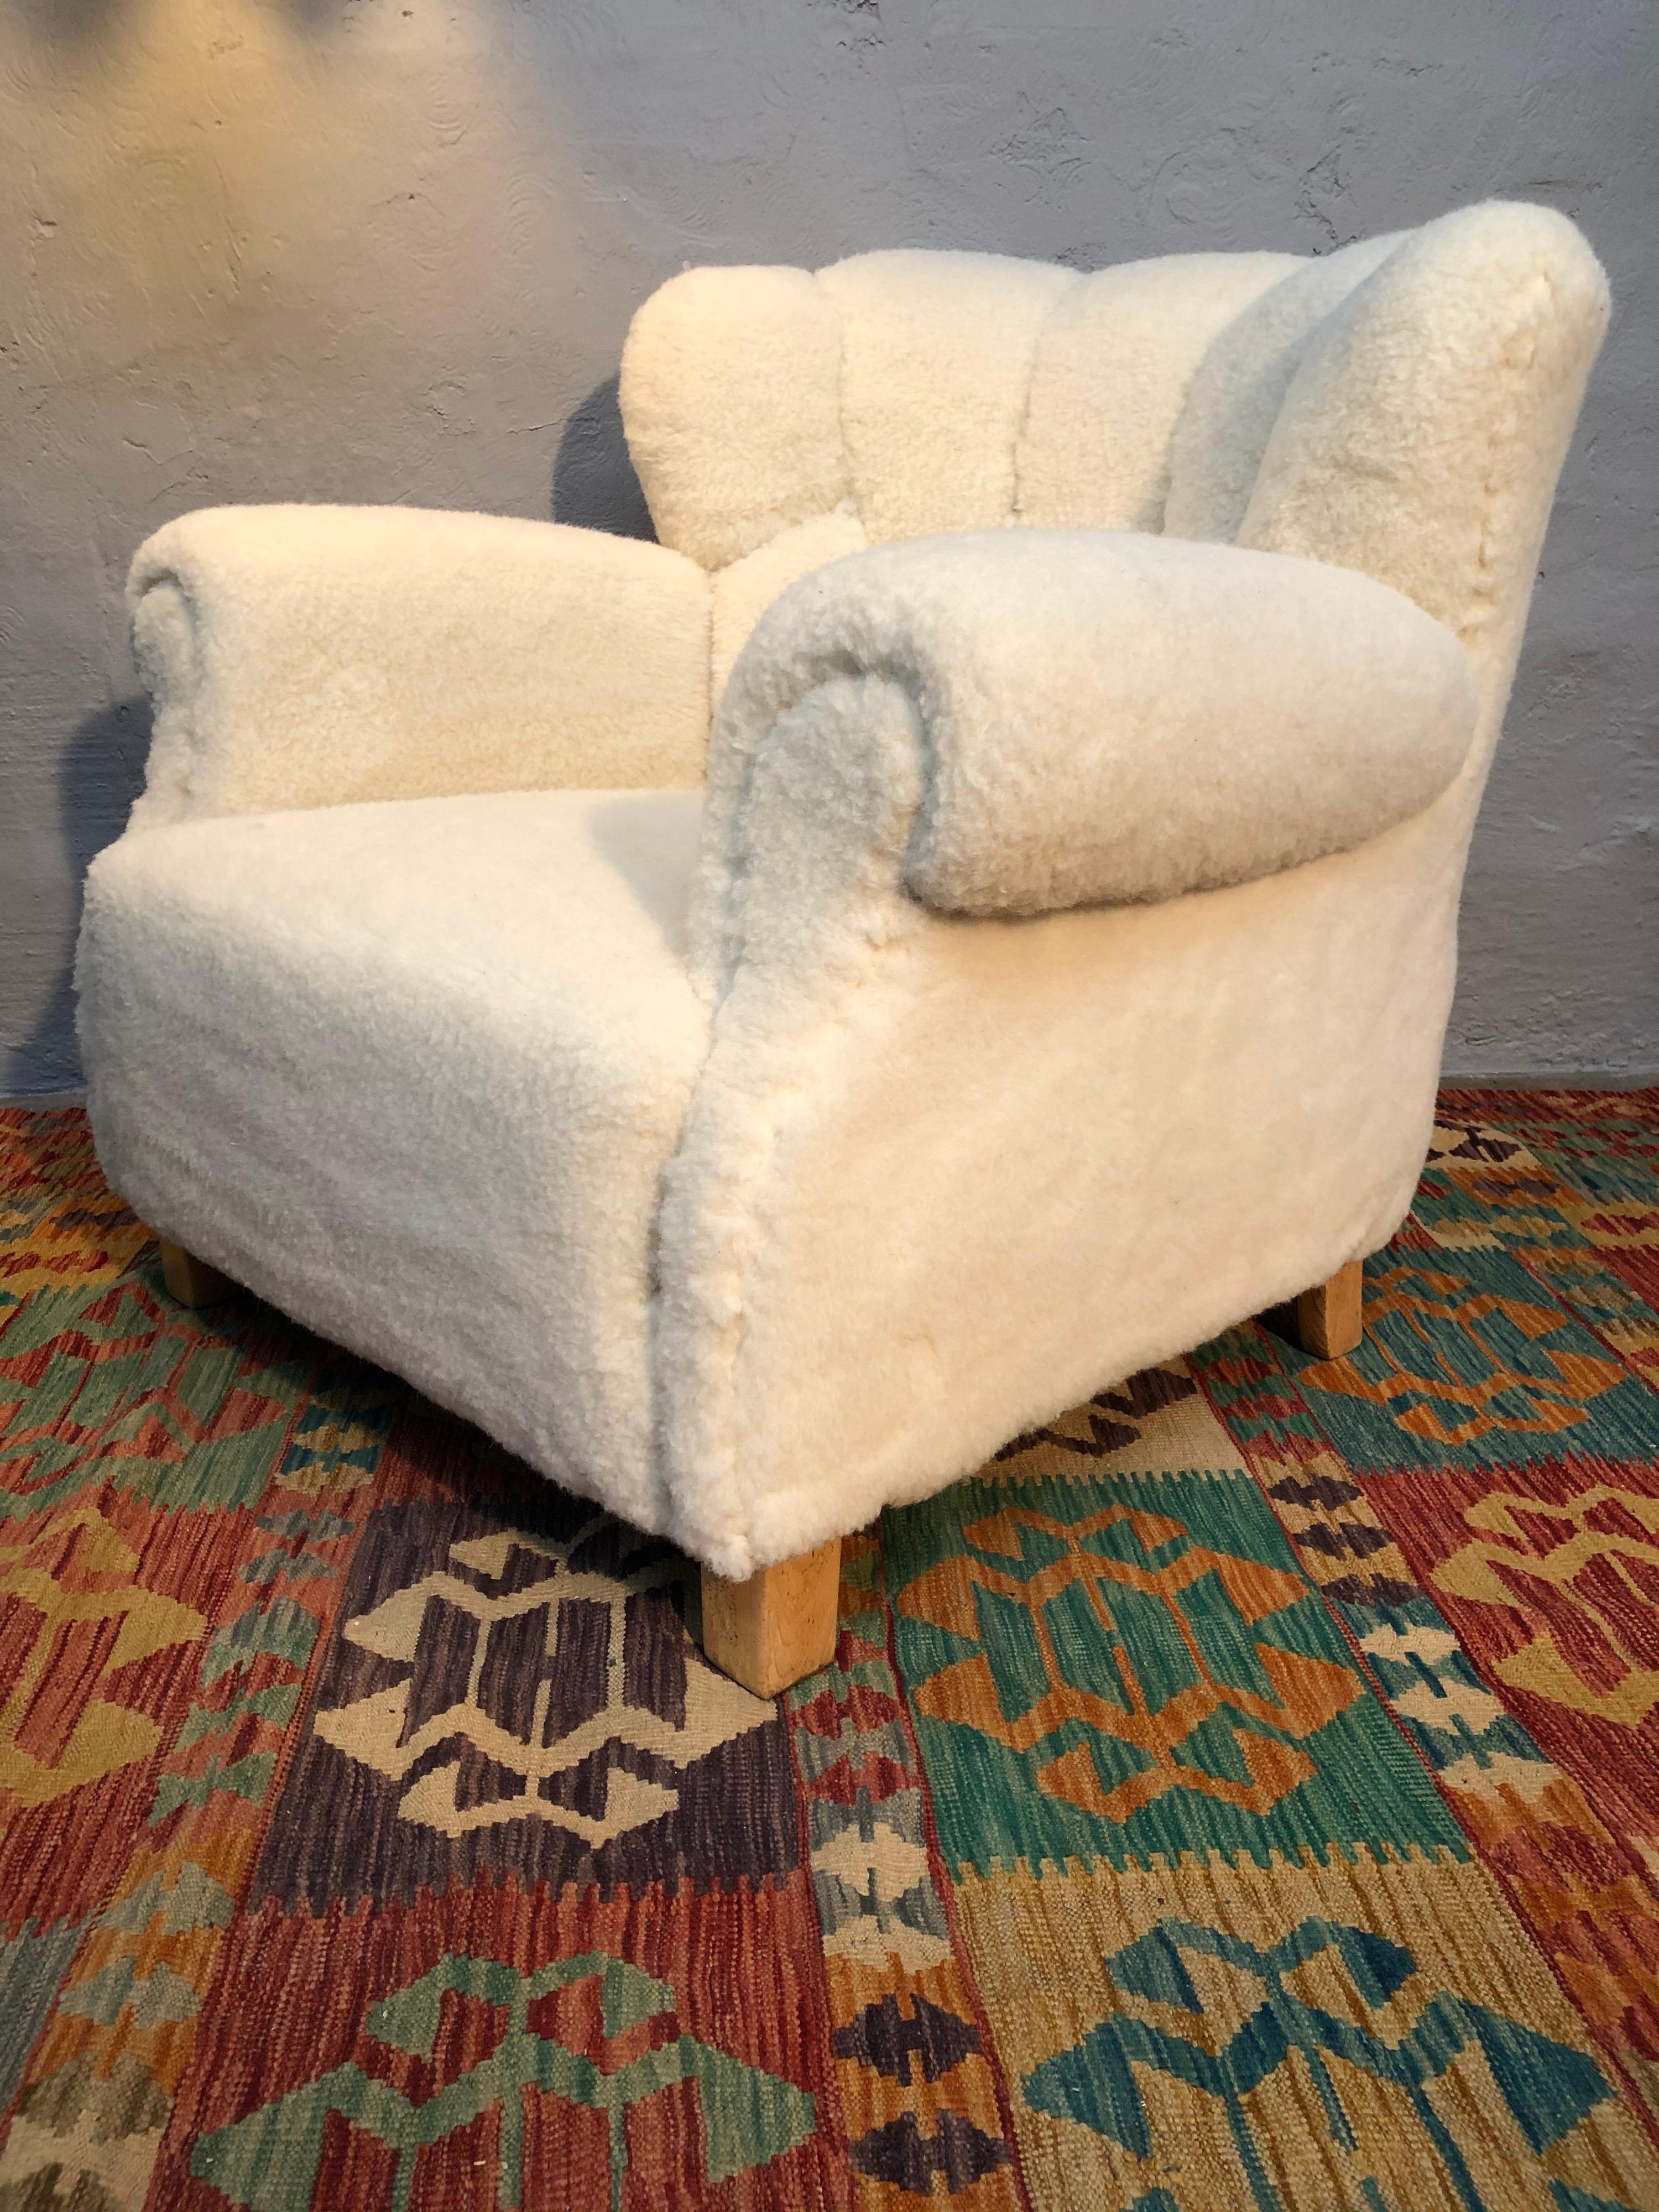 Classic Fritz Hansen lounge chair model 1518B in lamps wool from the 1940s. 
Recently reupholstered in Denmark in a beautiful white lamps wool skin. 
Stunning piece of furniture from a period that produced some amazing designs with great